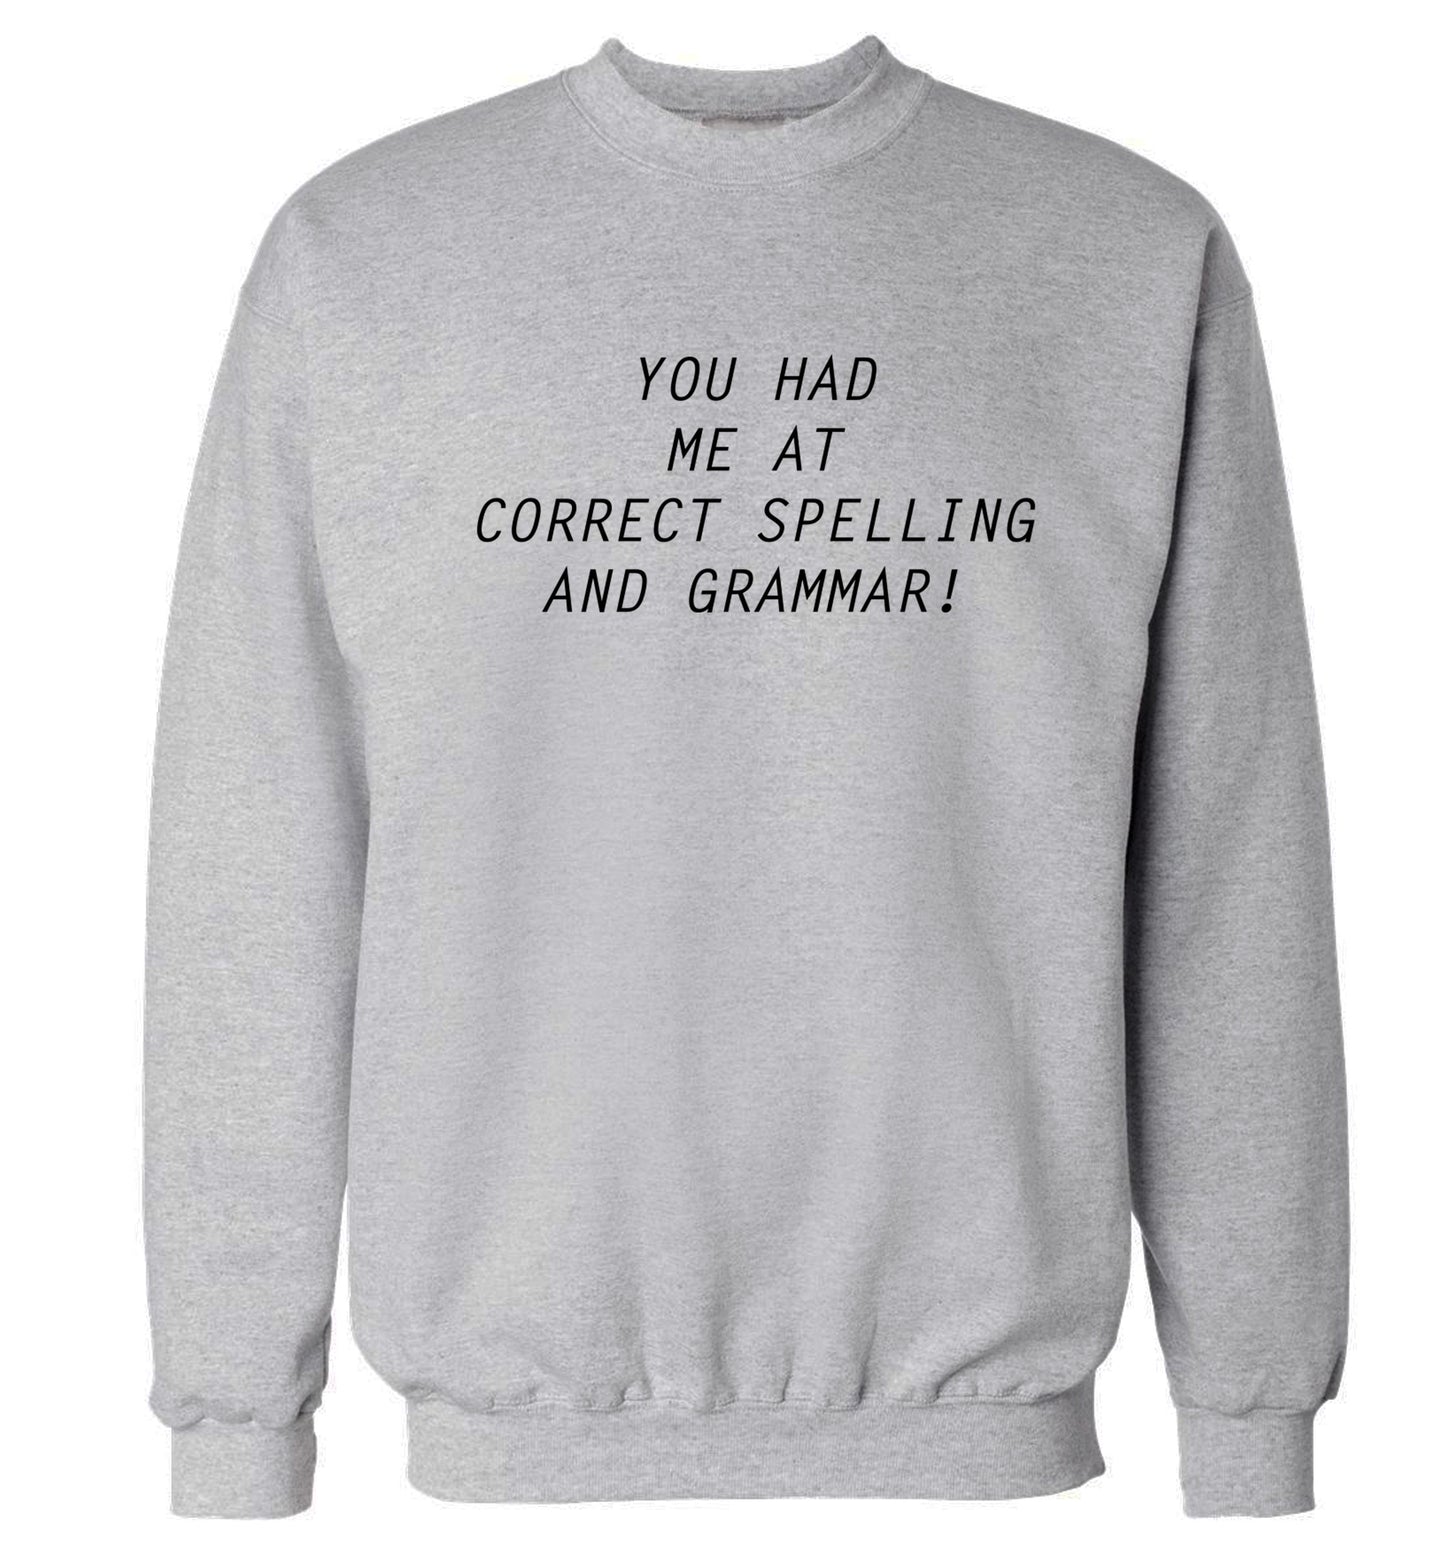 You had me at correct spelling and grammar Adult's unisex grey Sweater 2XL